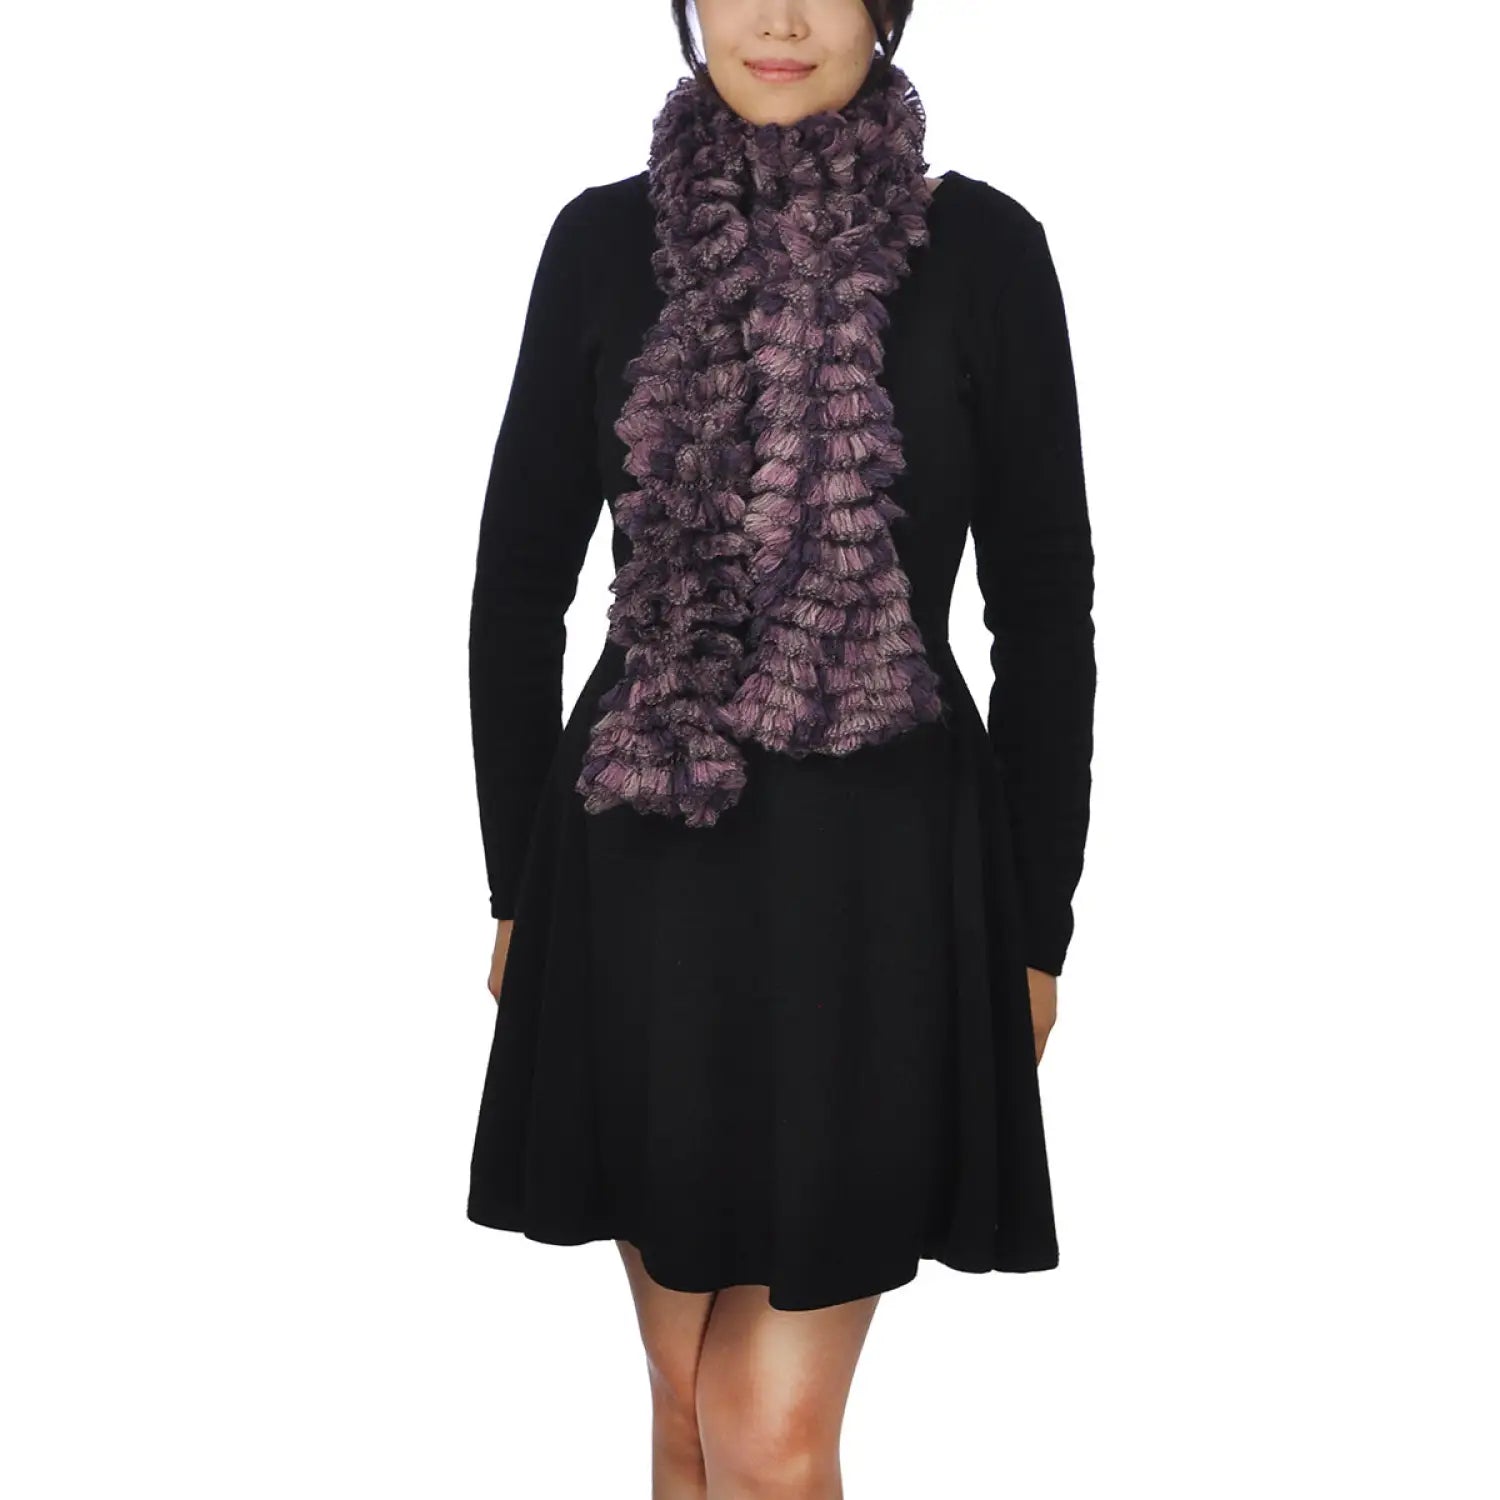 Woman wearing a black dress and purple scarf from Multicoloured Textured Boa Print Scarf.